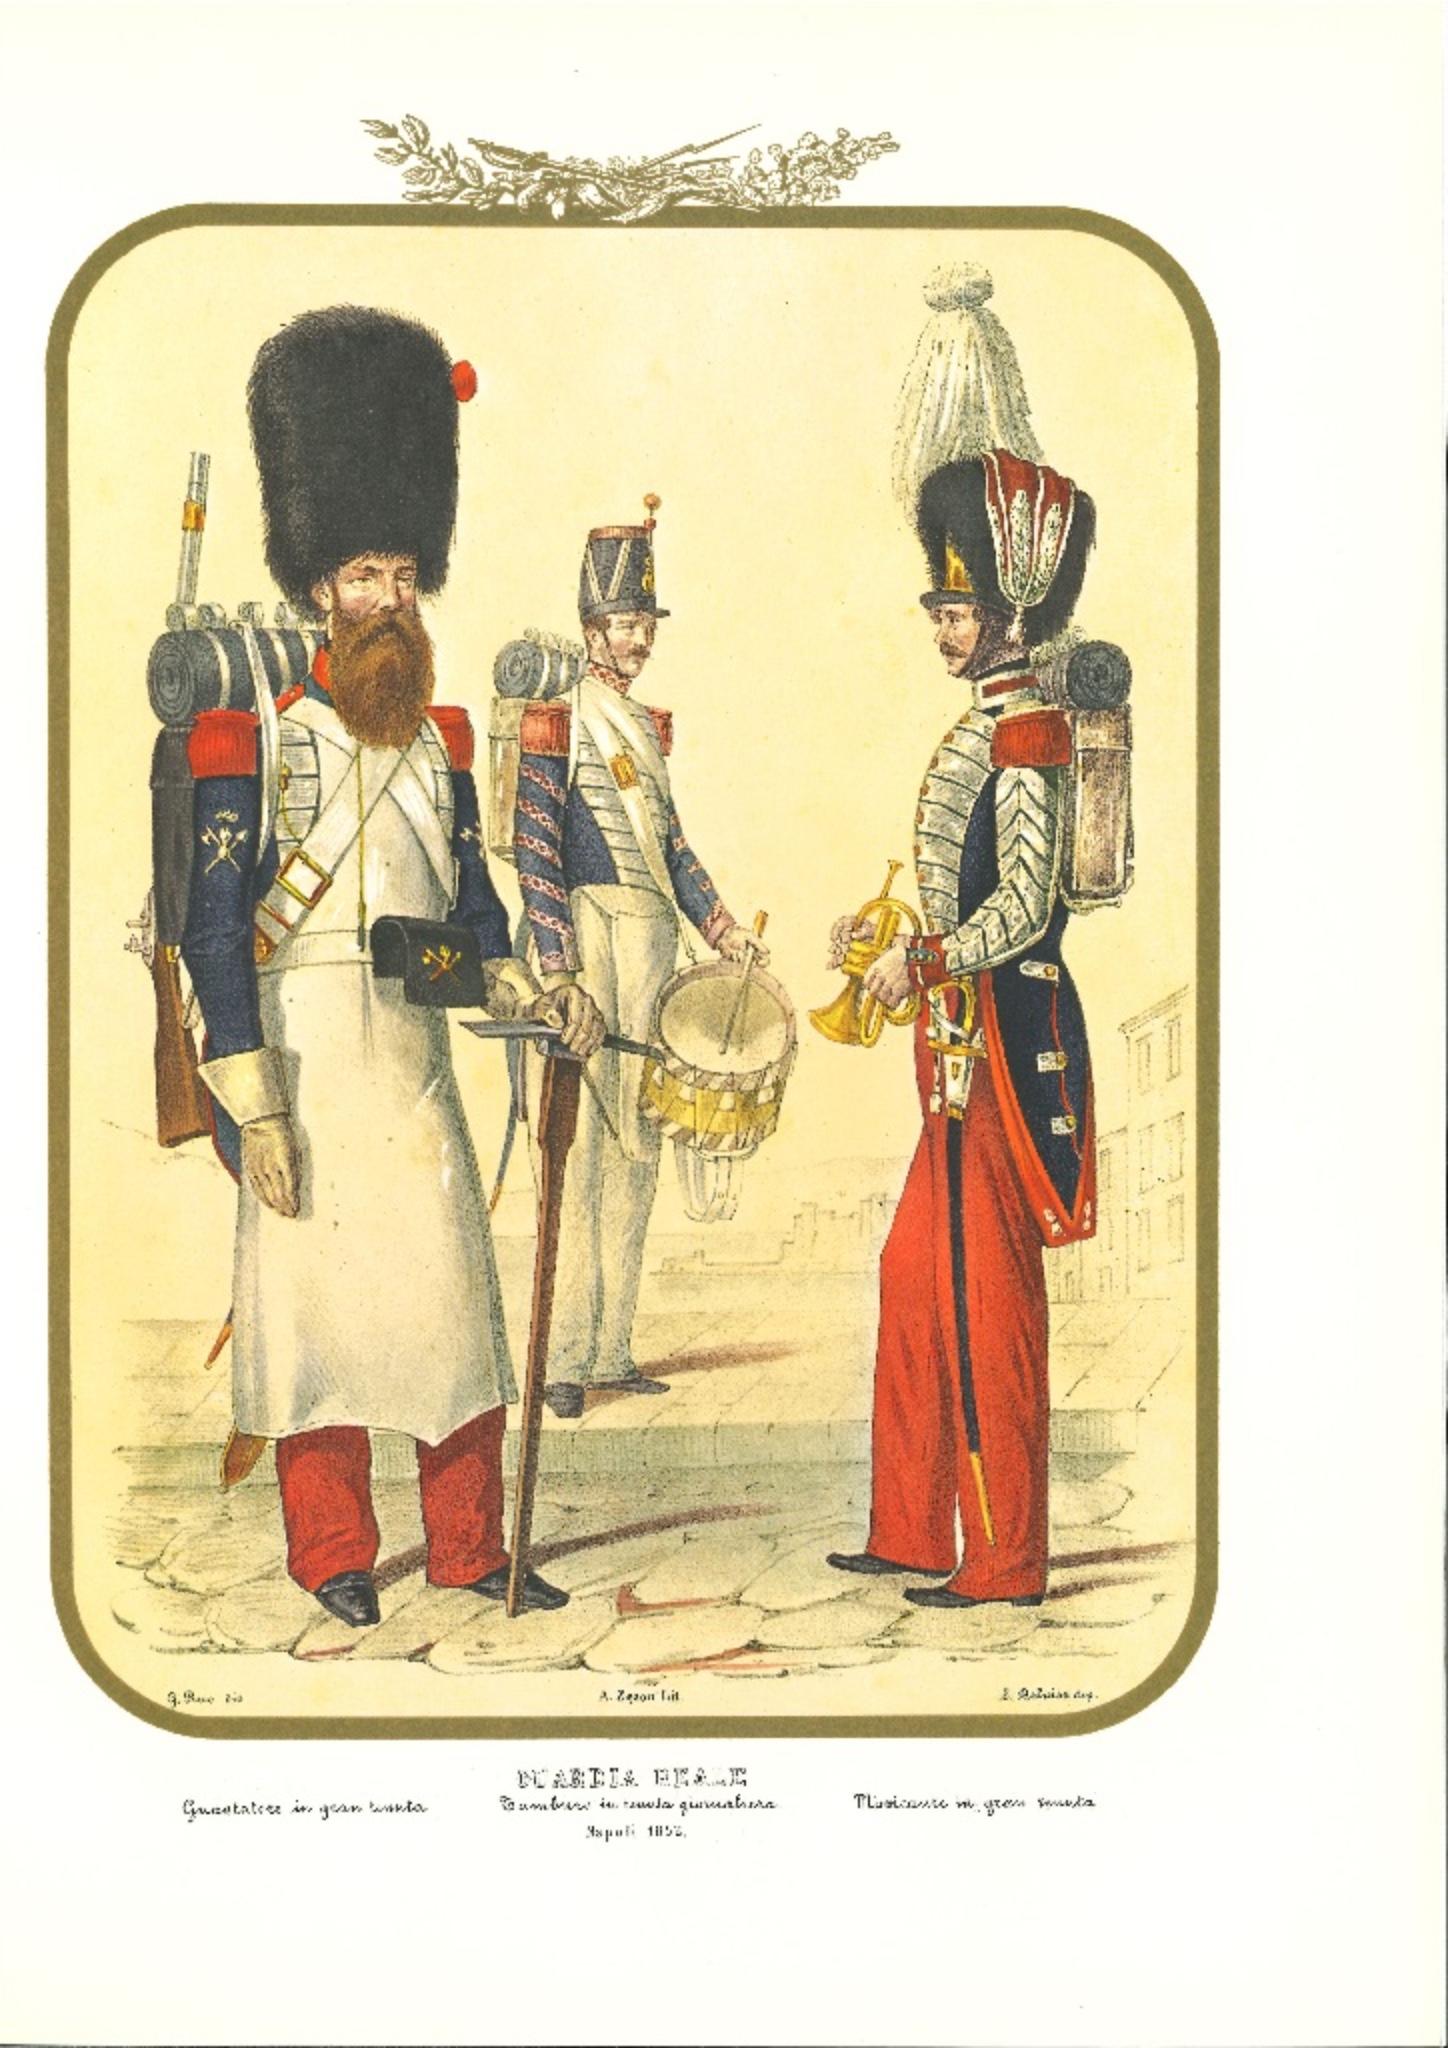 Real Guard is an original lithograph by Antonio Zezon. Naples, 1852.

Interesting colored lithograph which describes the Real Guard, alongside with a Sapper in dressing uniform, a Guard playing the drum in daily clothing and Musician in dressing